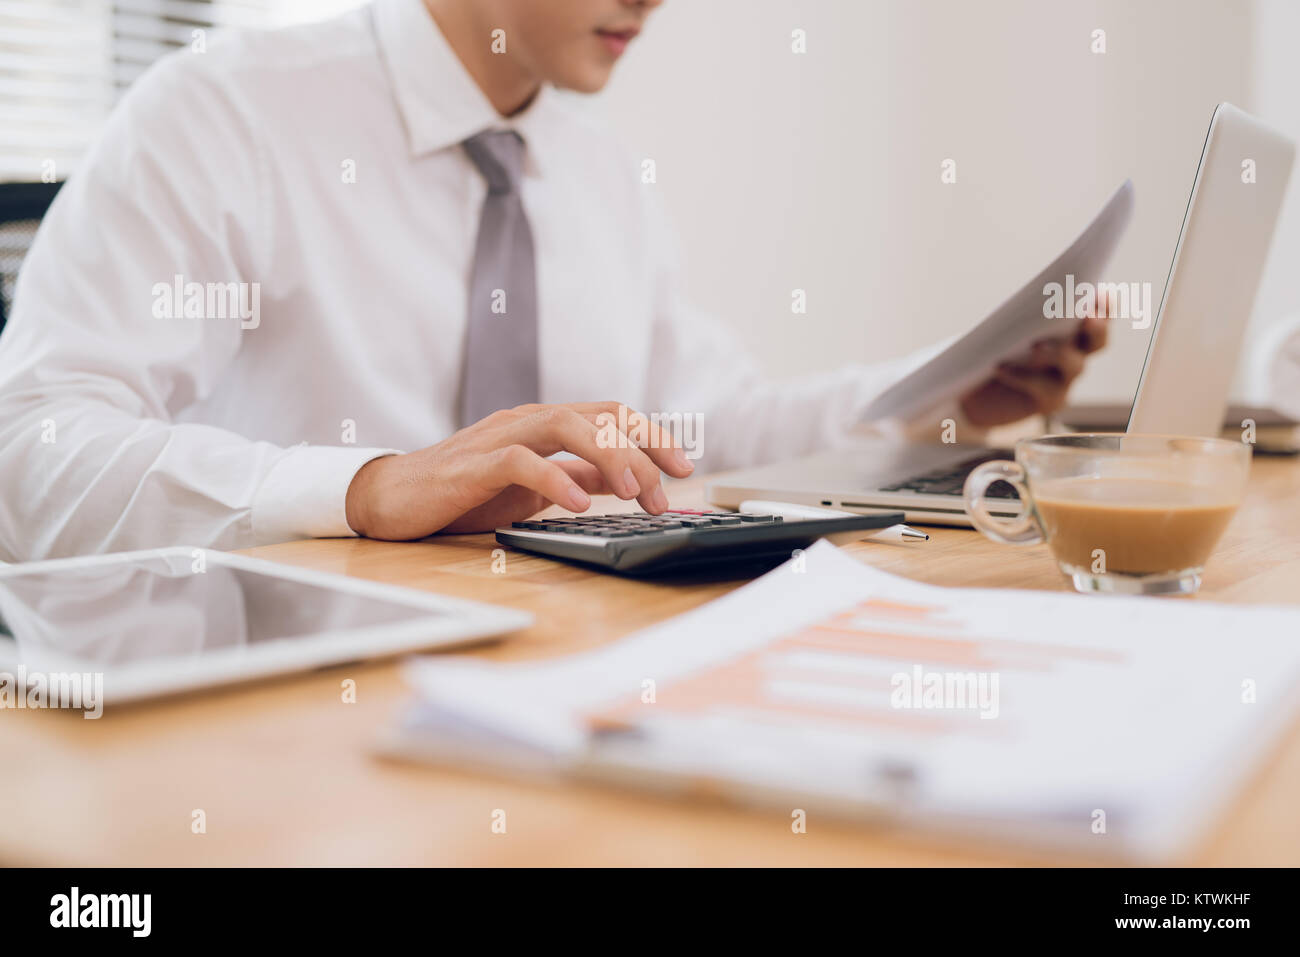 Close up of hands of business man working on laptop.Blank screen for graphic display montage. Stock Photo